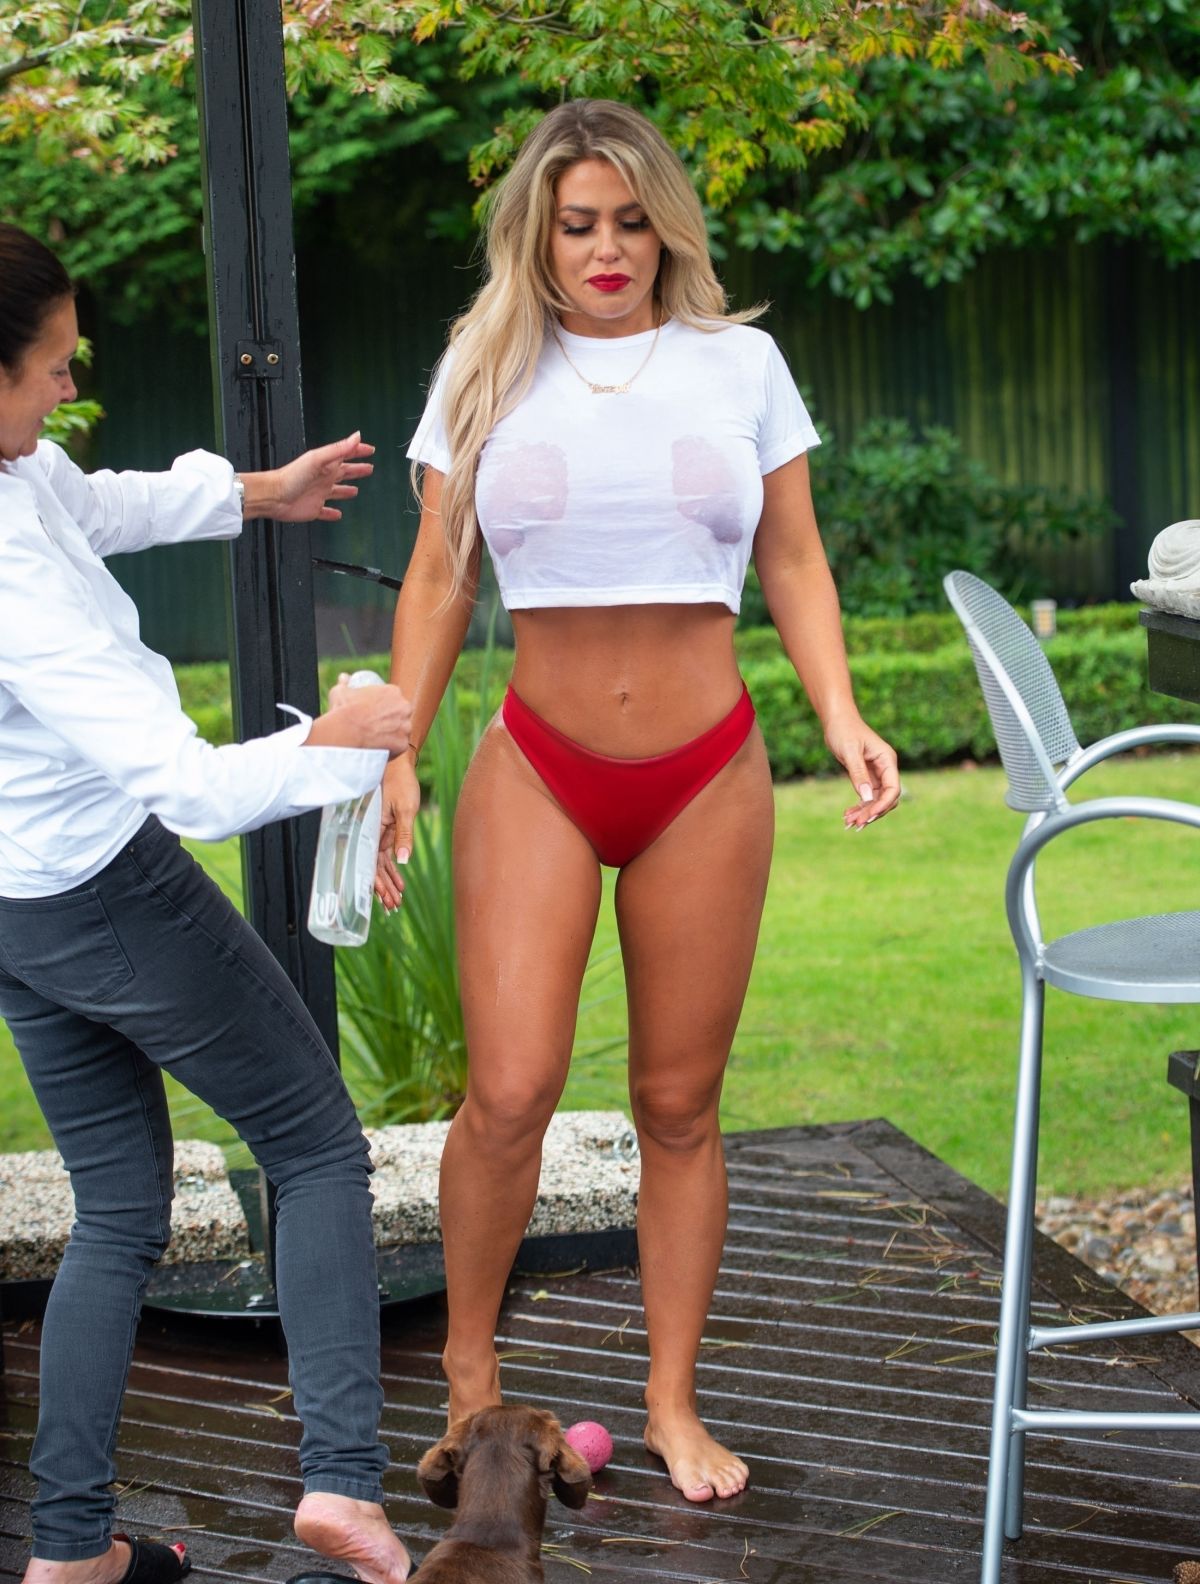 Bianca Gascoigne In Wet T-Shirt for Calendar 2021 - Nude Celebs, Glamour  Models Pictures and gifs